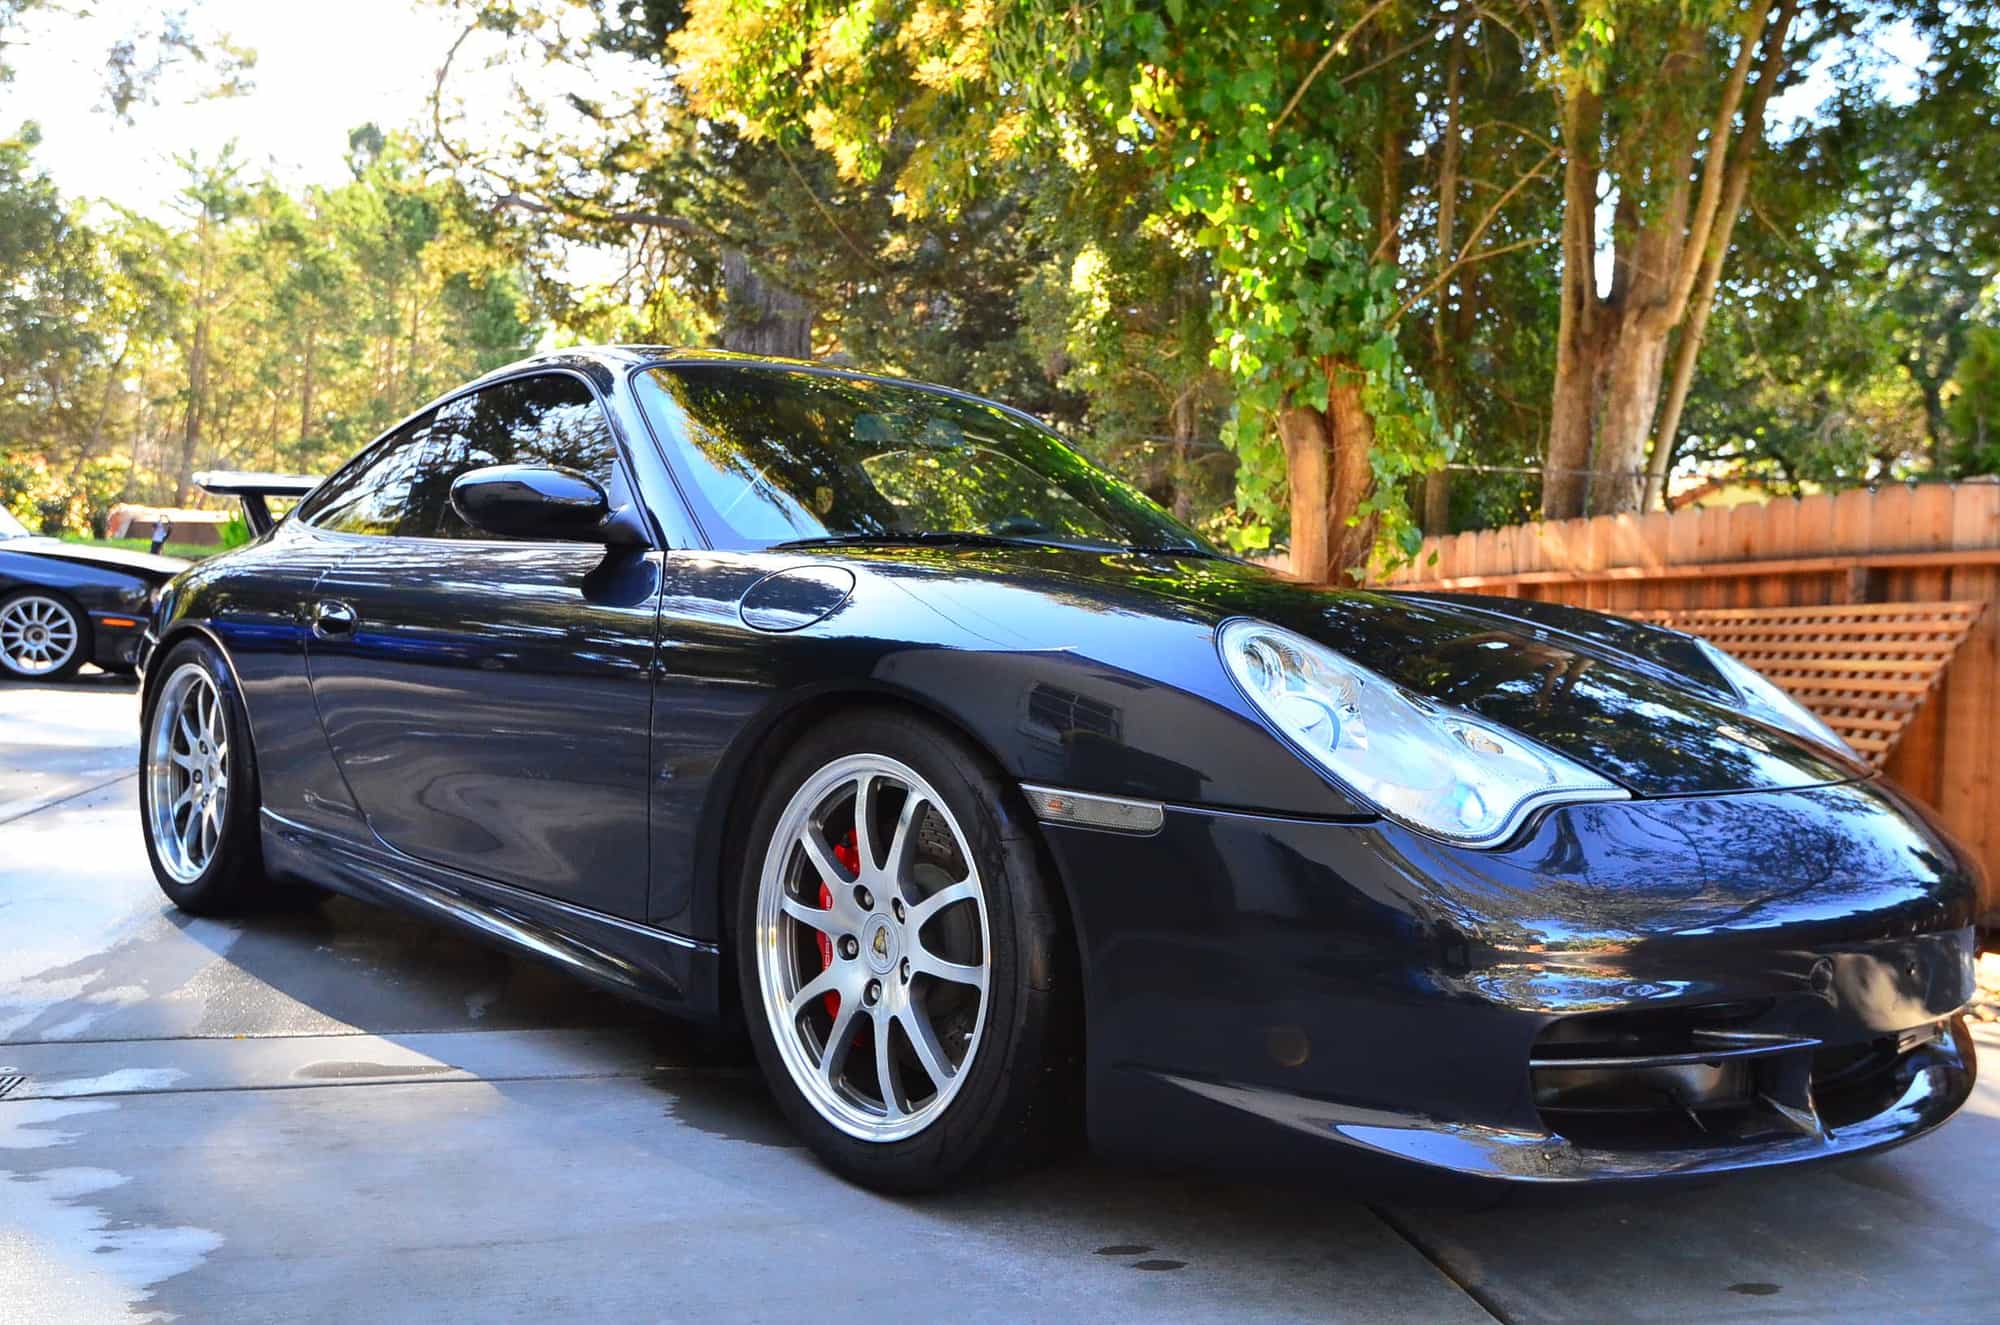 2004 Porsche GT3 - Extremely clean 996 GT3 under 10,000 miles - Used - VIN wp0ac29974s692616 - 6 cyl - 4WD - Manual - Coupe - Gray - San Carlos, CA 94070, United States